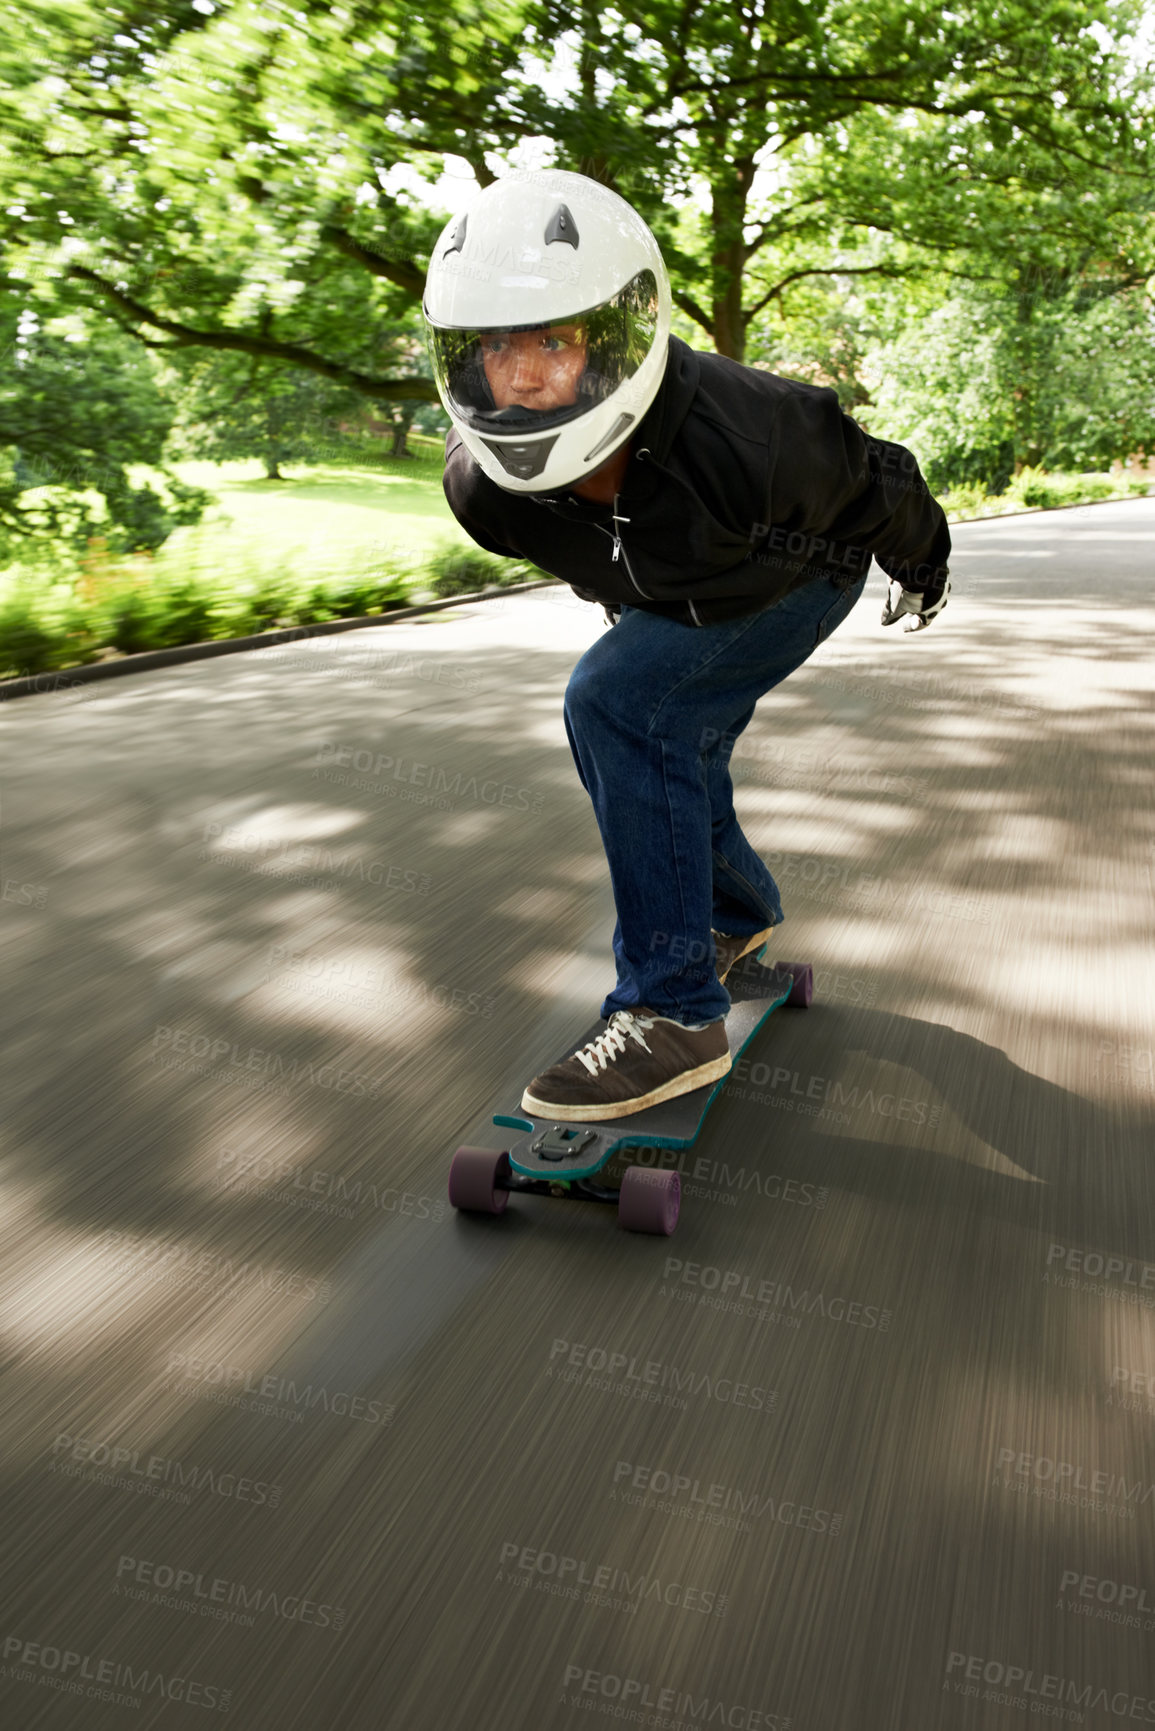 Buy stock photo Shot of a man skateboarding down a lane at high speed on his board